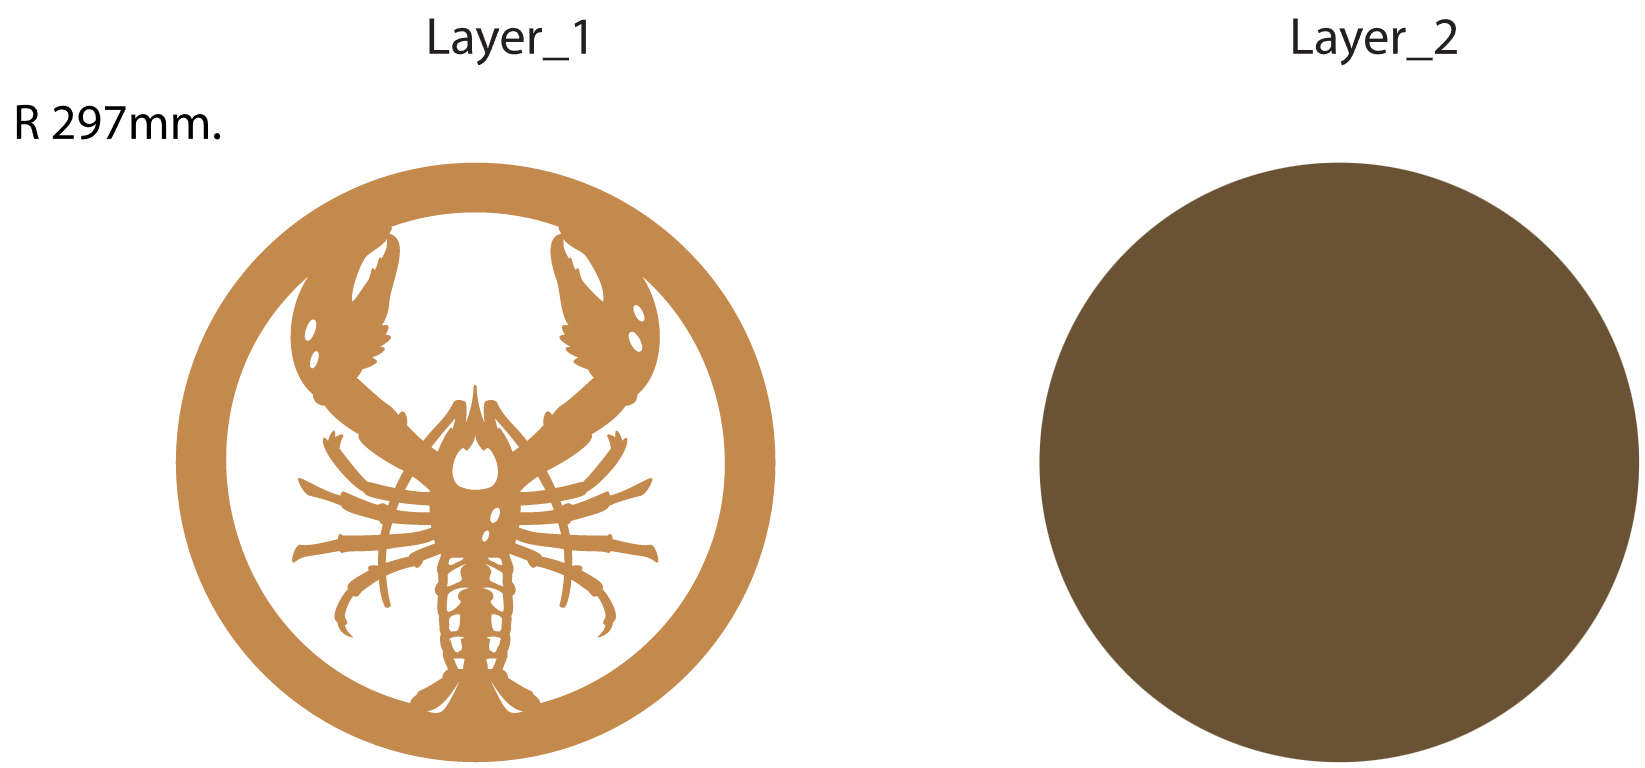 Lobster wooden coaster multilayer cut file layers